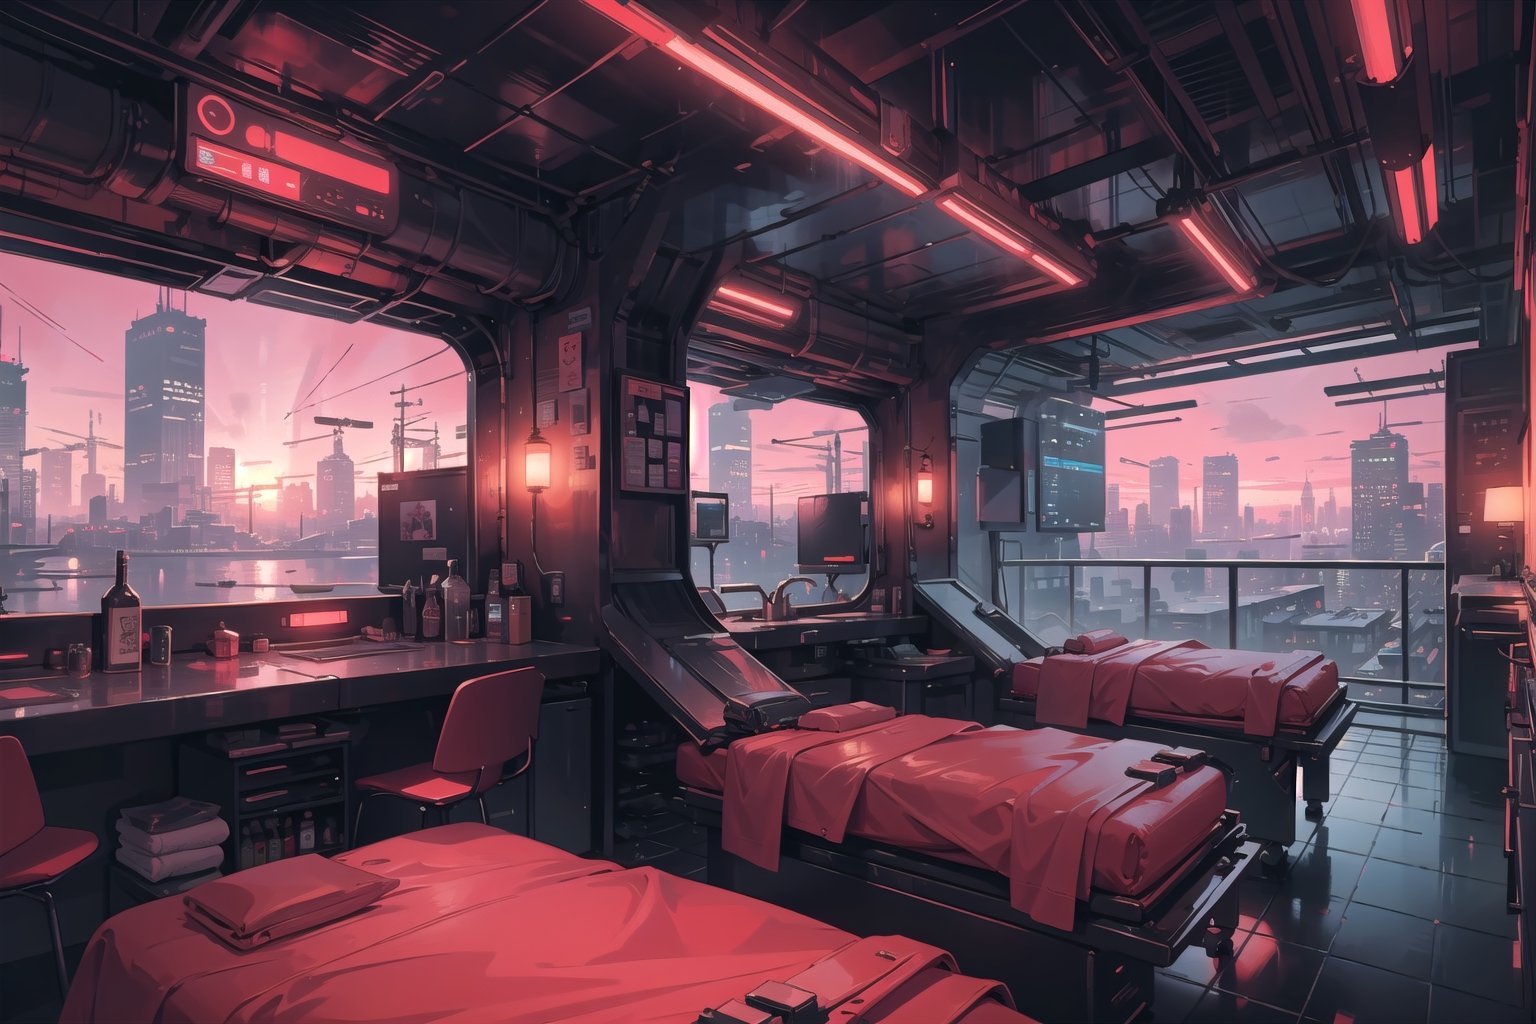 Create a digital illustration featuring a luxurious massage room of futuristic style, with bright red lights and a gorgeous view of a cyberpunk city.